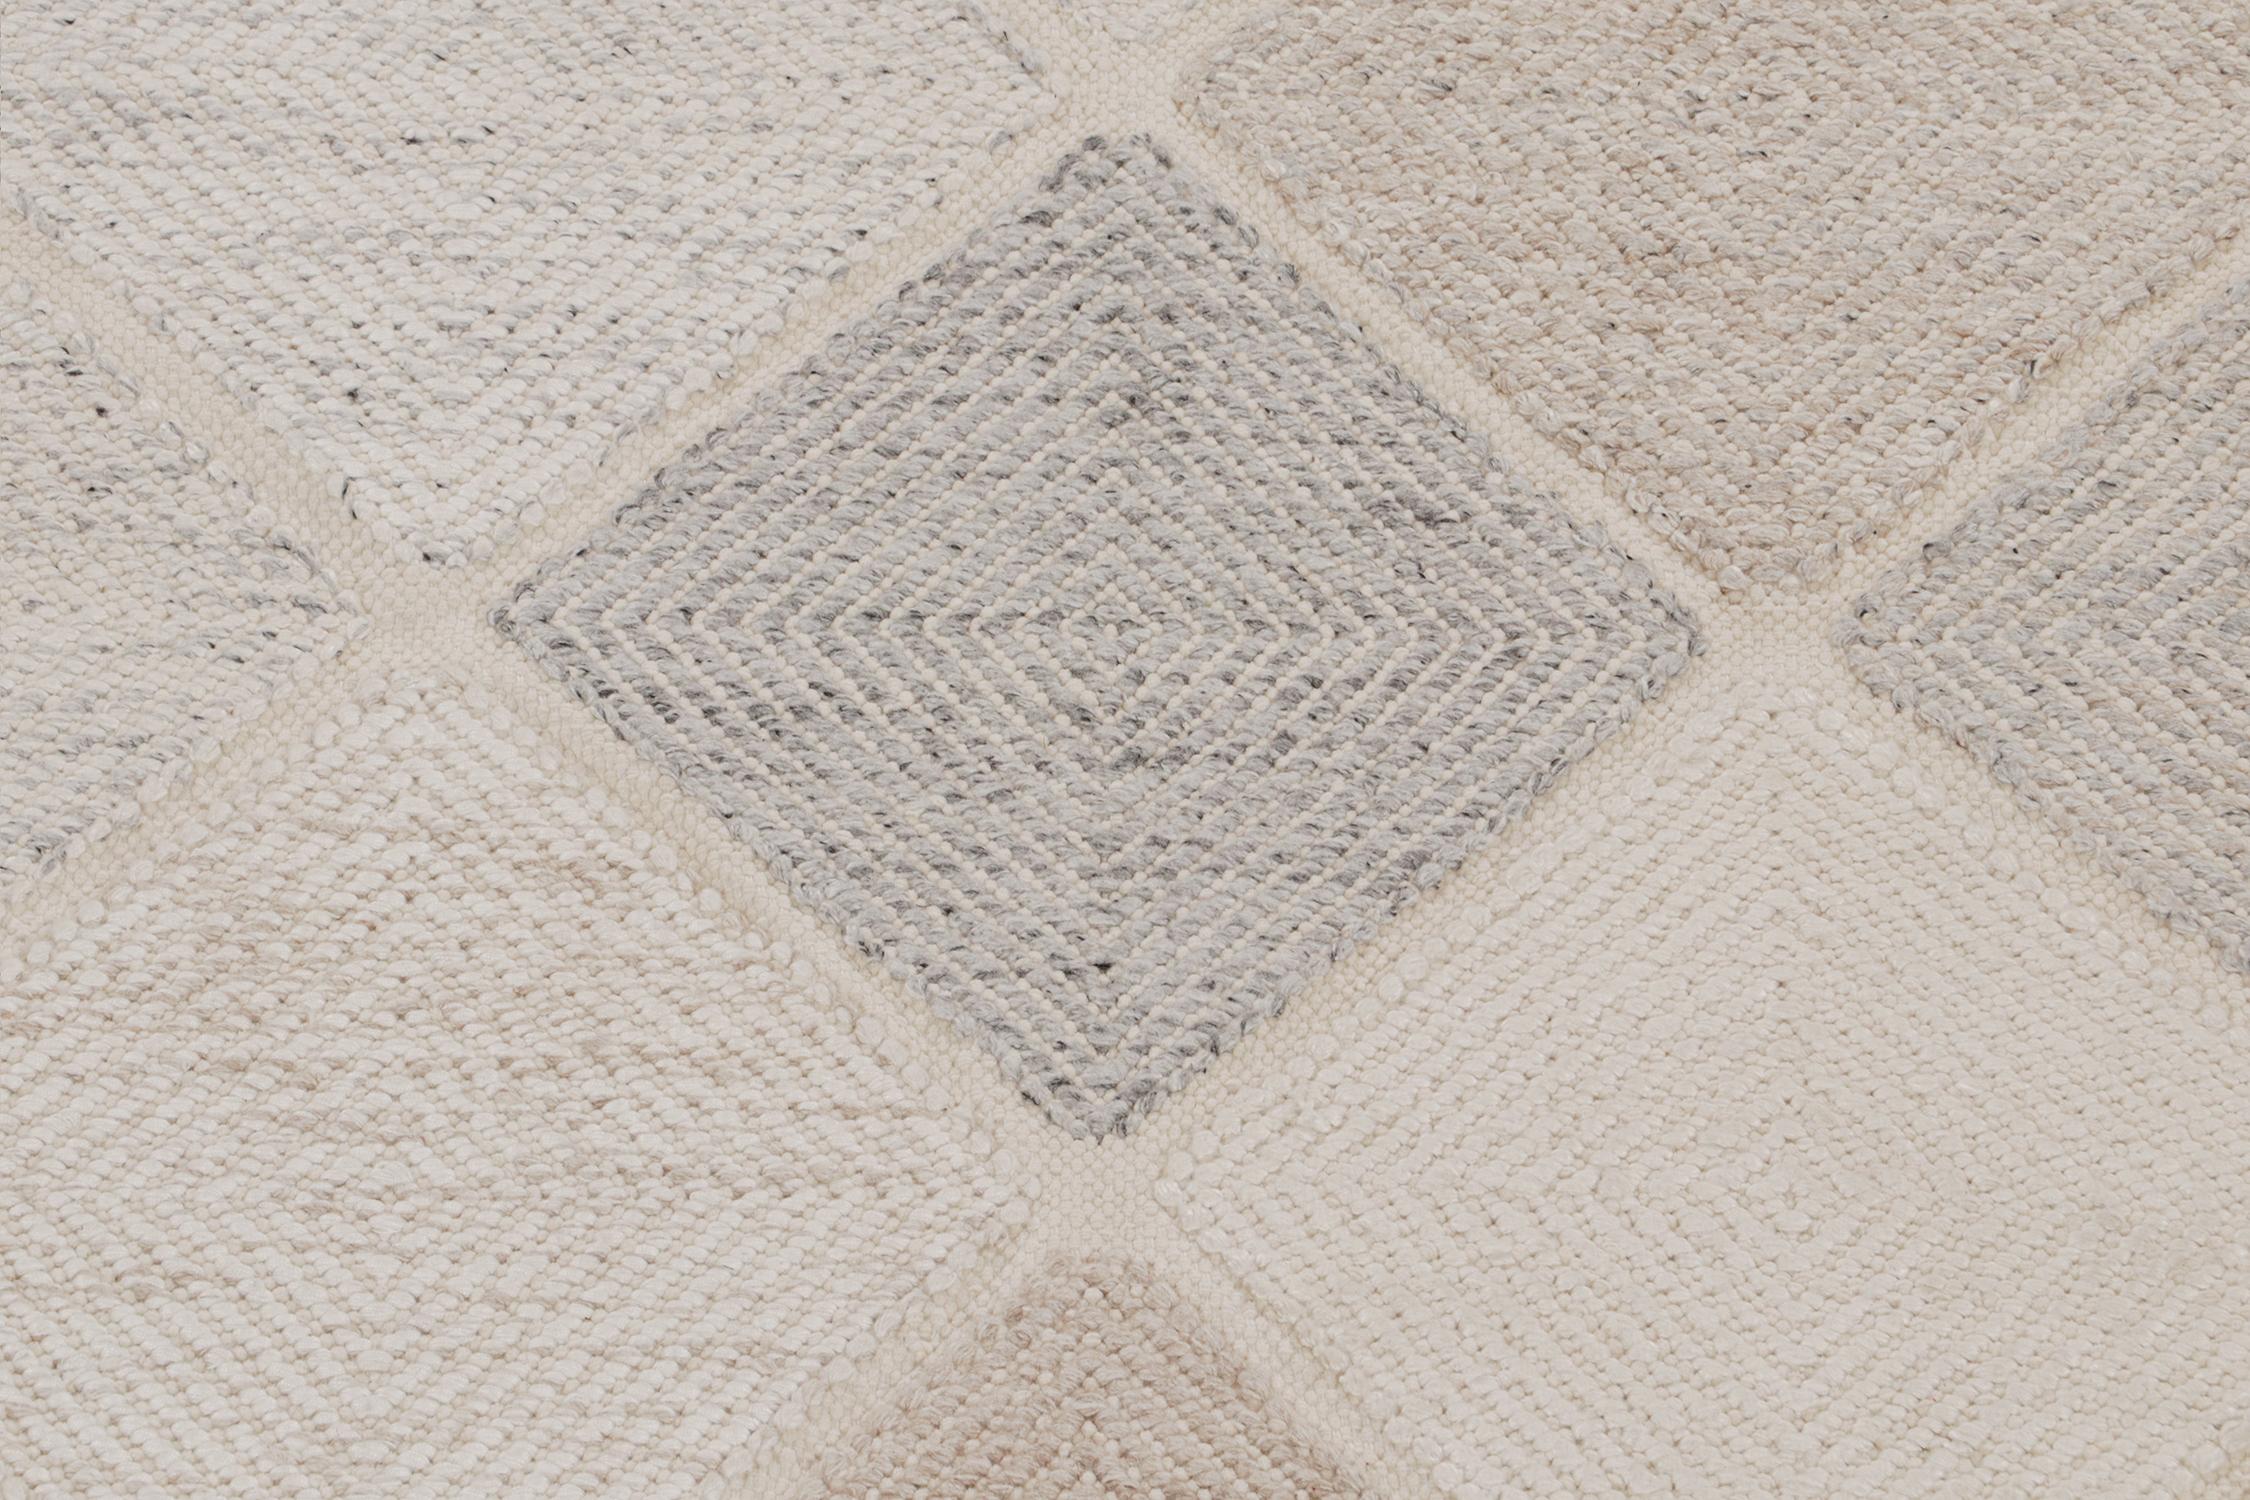 Rug & Kilim’s Scandinavian Style Kilim in White, Taupe & Gray Diamond Patterns In New Condition For Sale In Long Island City, NY